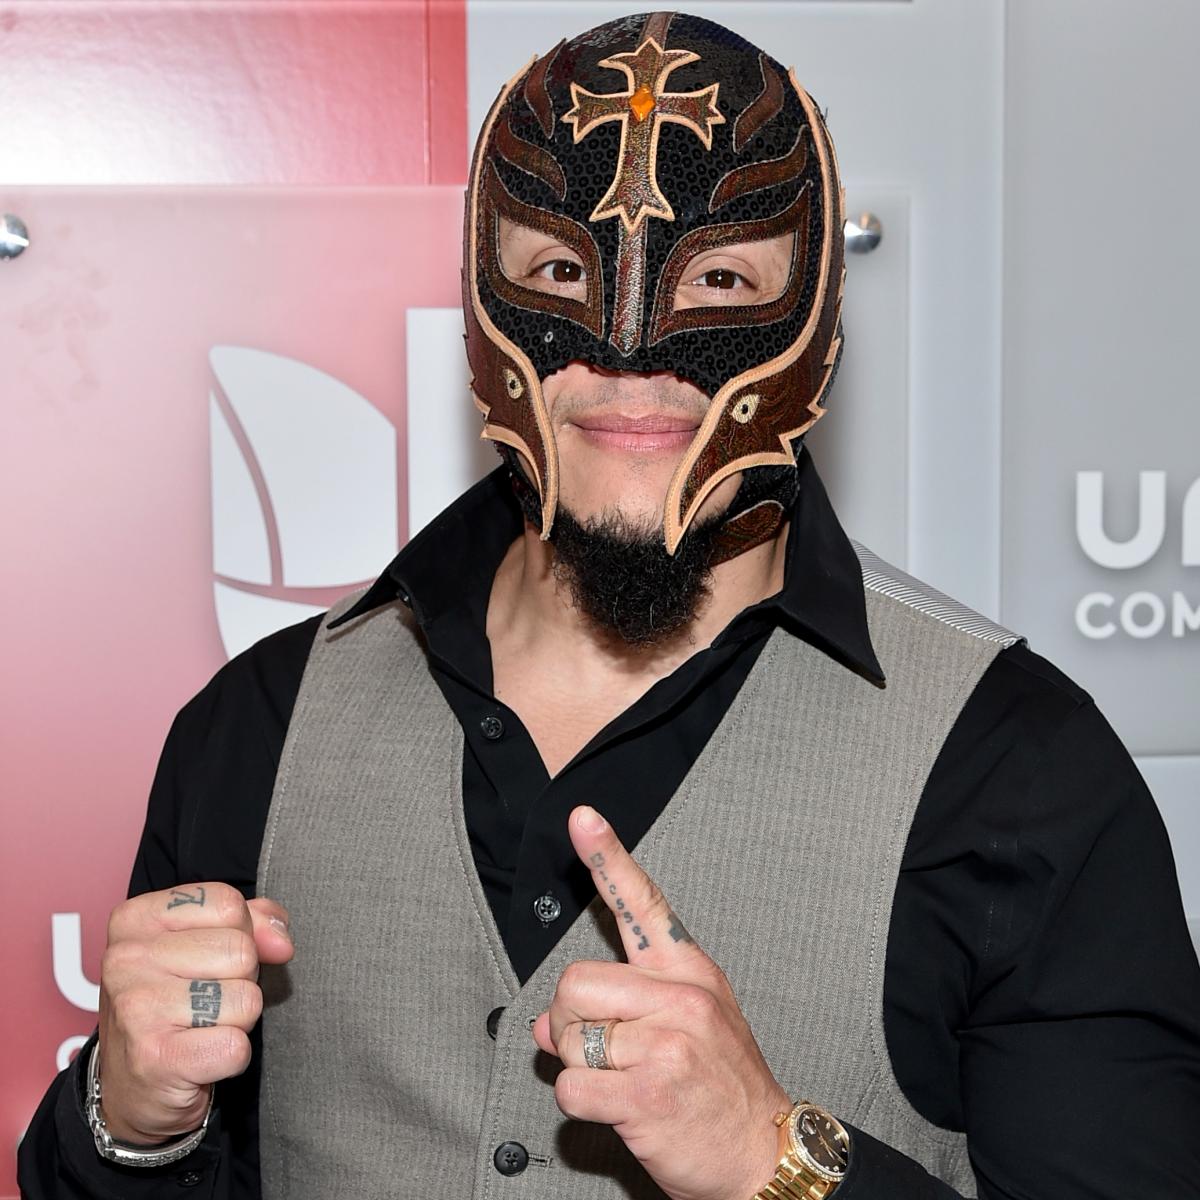 Rey Mysterio Joins Aro Lucha as Co-Owner, Performer Amid WWE WrestleMania Rumors